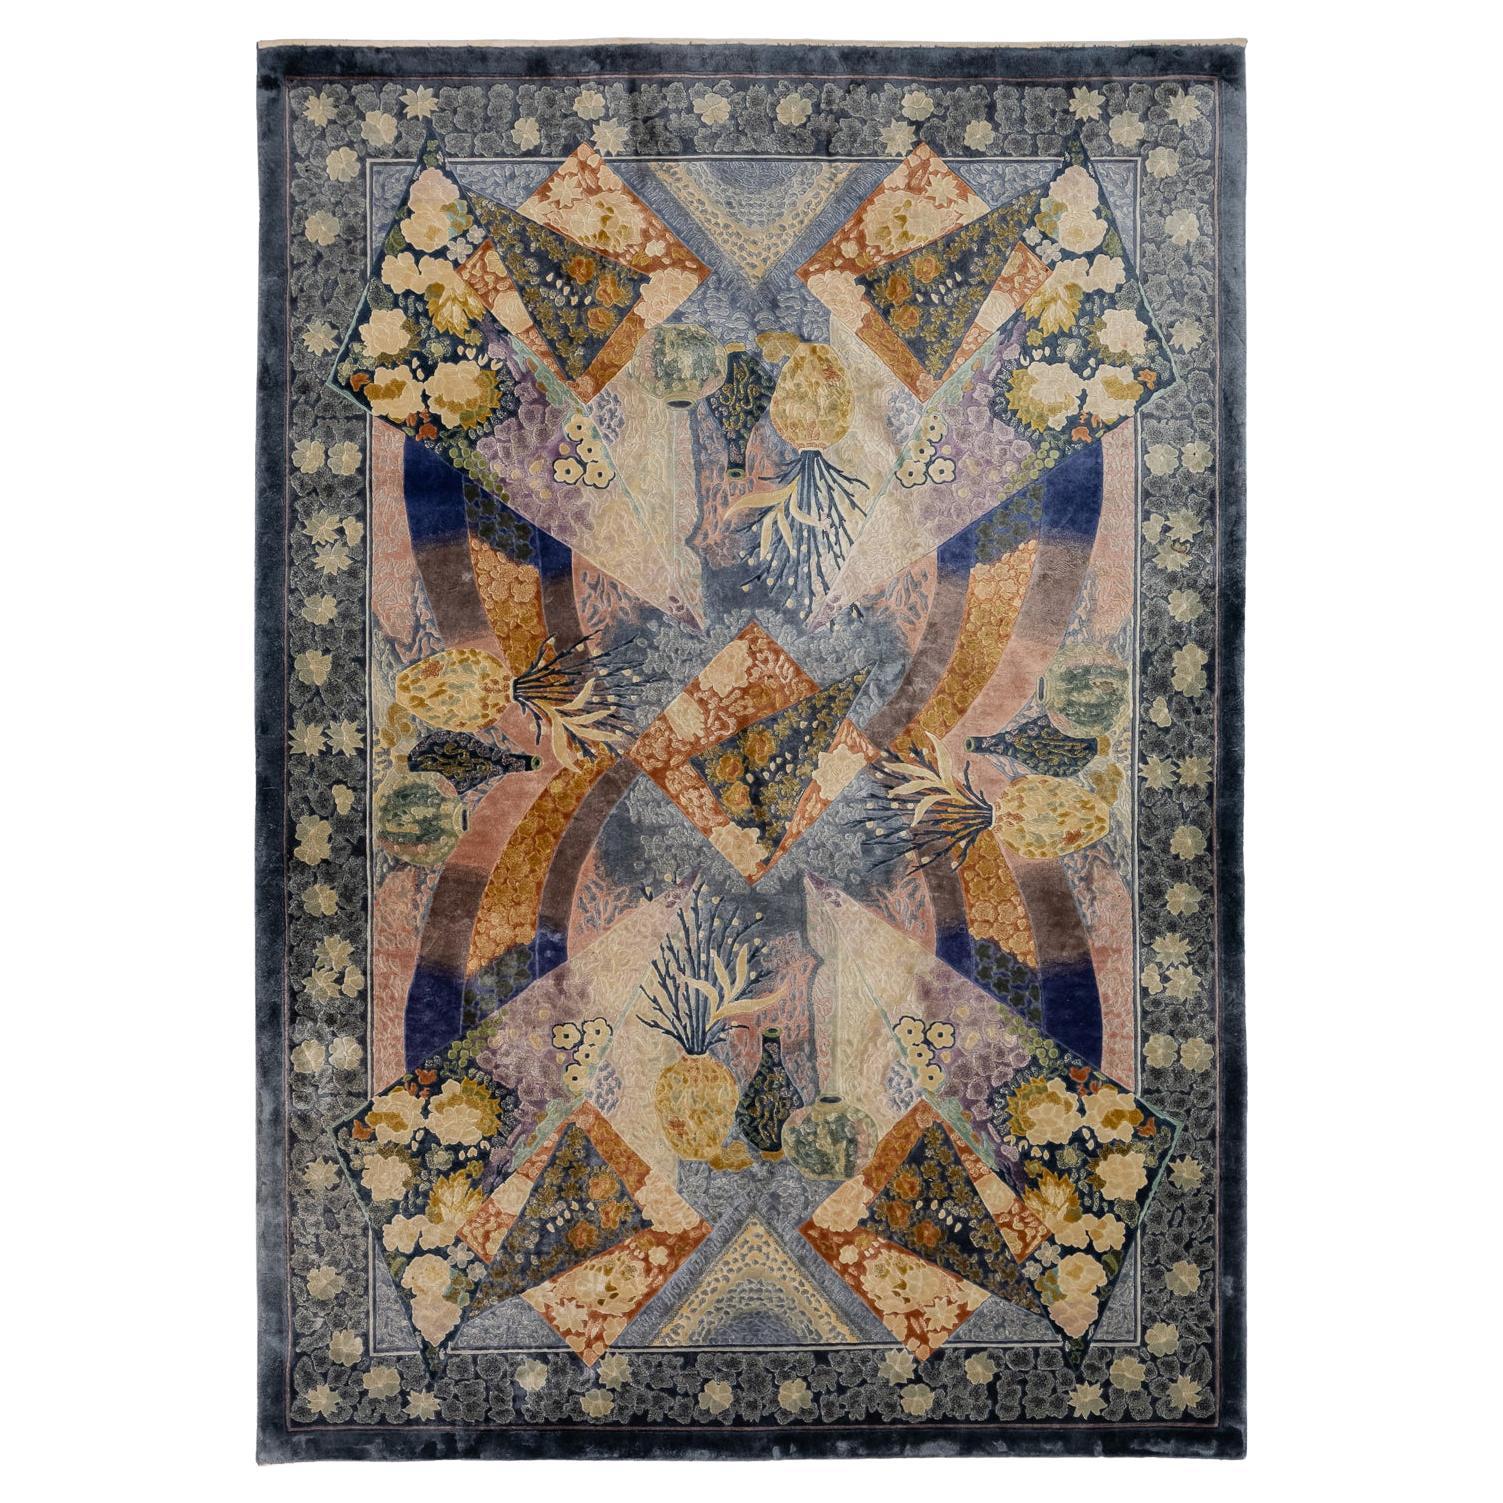 Chinese Art Deco Silk Rug Abstract Design